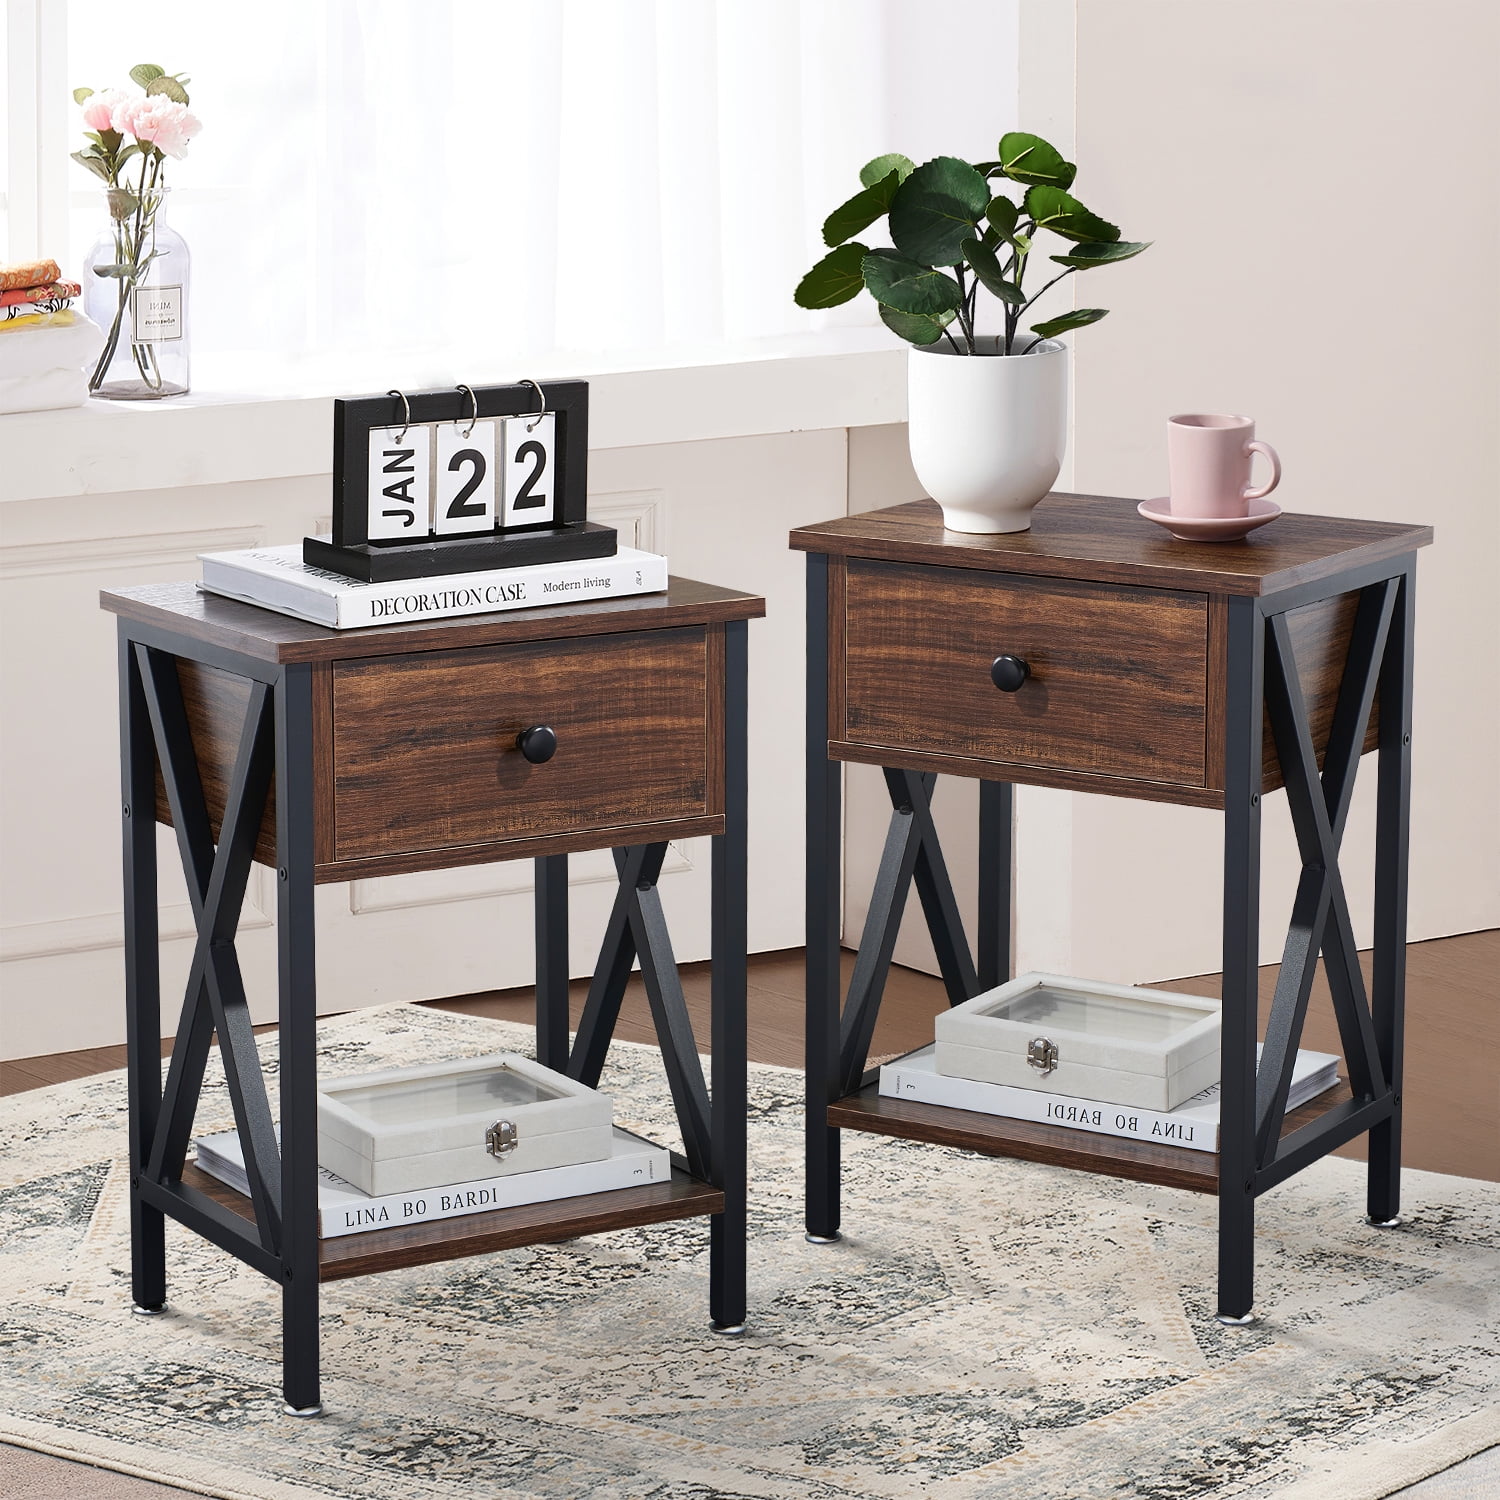 Set of 2 Night Stand End Table Bed Sofa Side Accent Table w/Drawer Simple Design